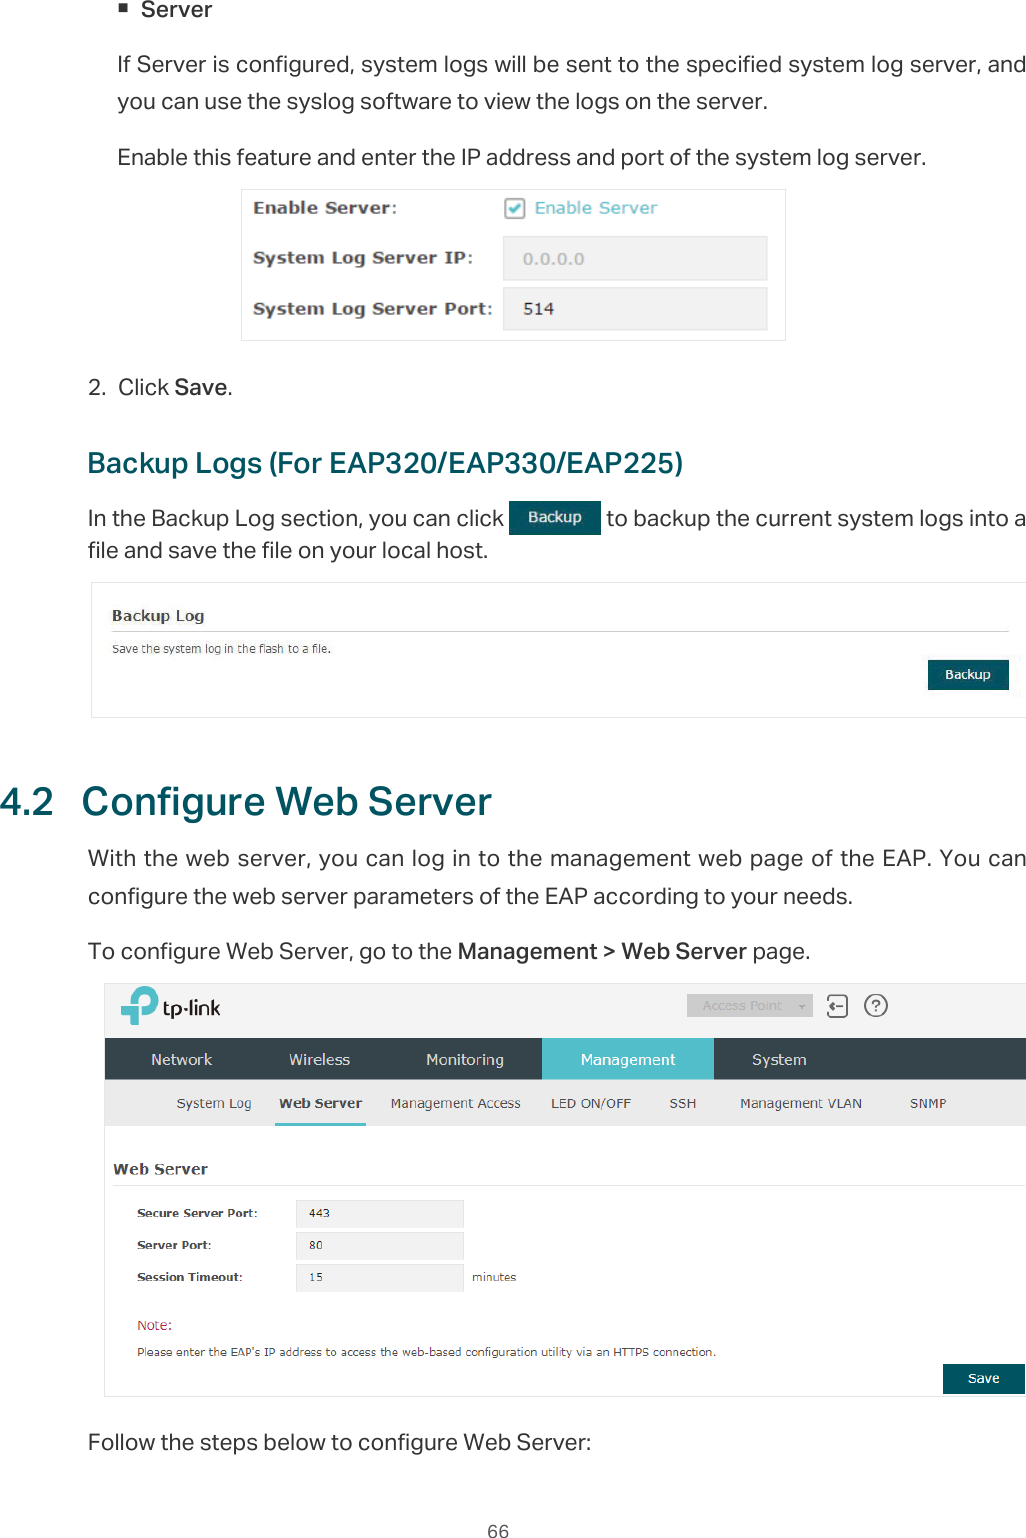  66 ServerIf Server is configured, system logs will be sent to the specified system log server, and you can use the syslog software to view the logs on the server. Enable this feature and enter the IP address and port of the system log server.2. Click Save.Backup Logs (For EAP320/EAP330/EAP225)In the Backup Log section, you can click   to backup the current system logs into a file and save the file on your local host.4.2  Configure Web ServerWith the web server, you can log in to the management web page of the EAP. You can configure the web server parameters of the EAP according to your needs.To configure Web Server, go to the Management &gt; Web Server page.Follow the steps below to configure Web Server: